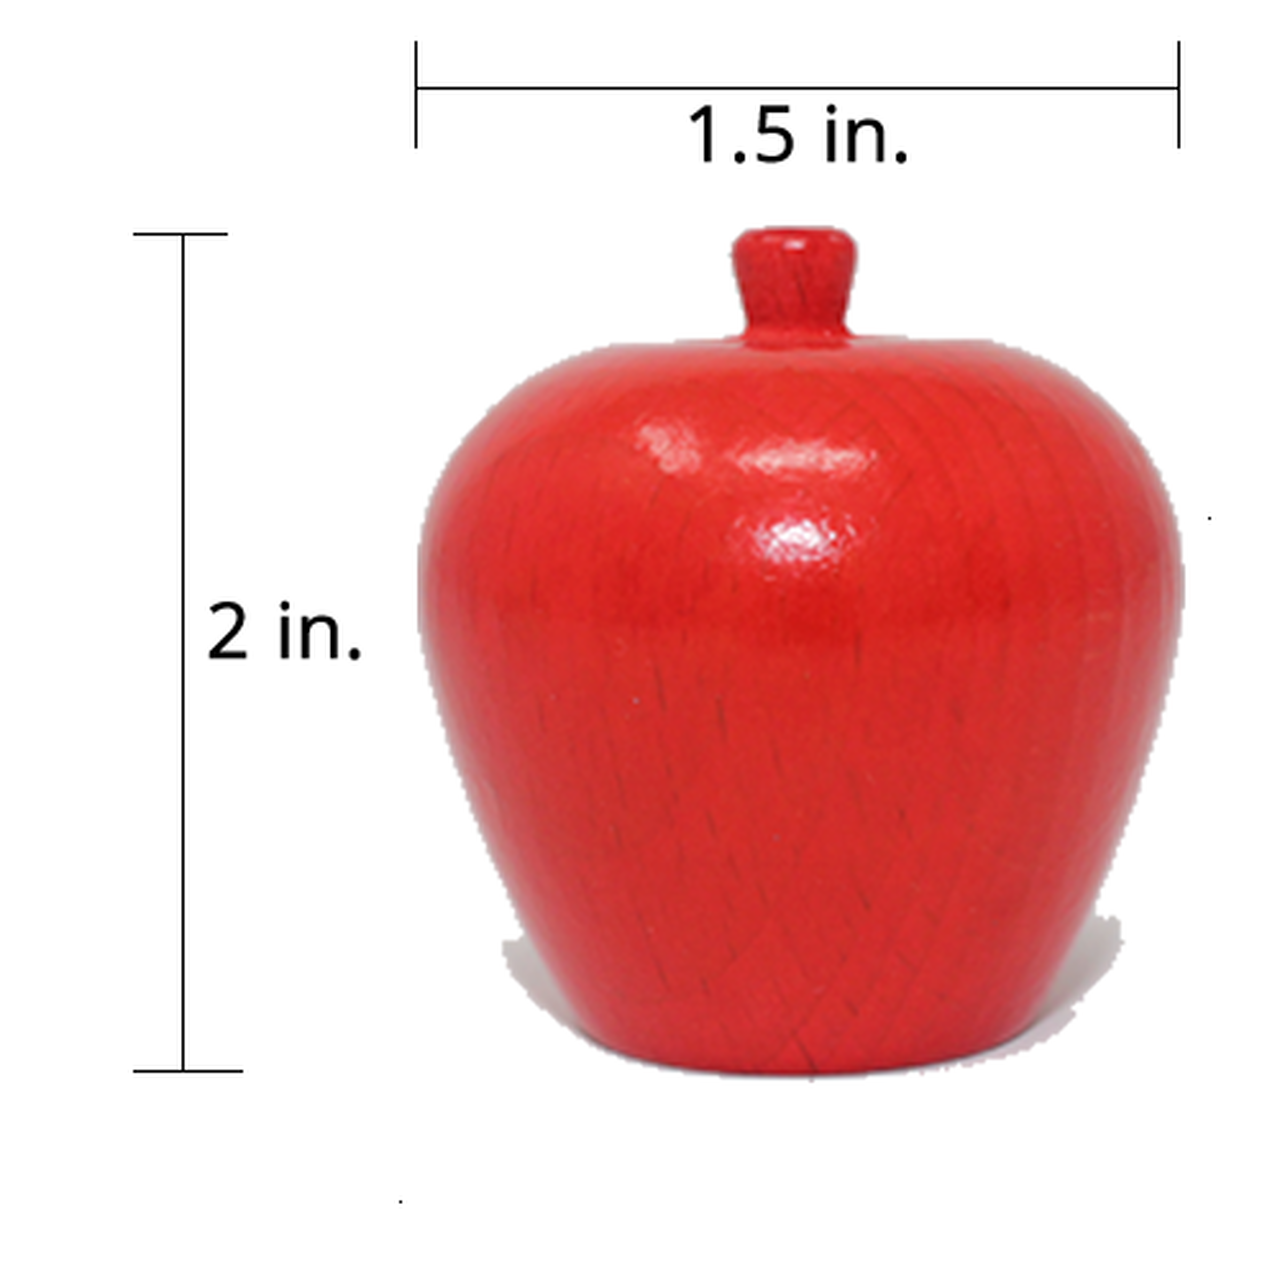 Apple piece from My First Orchard with size indication